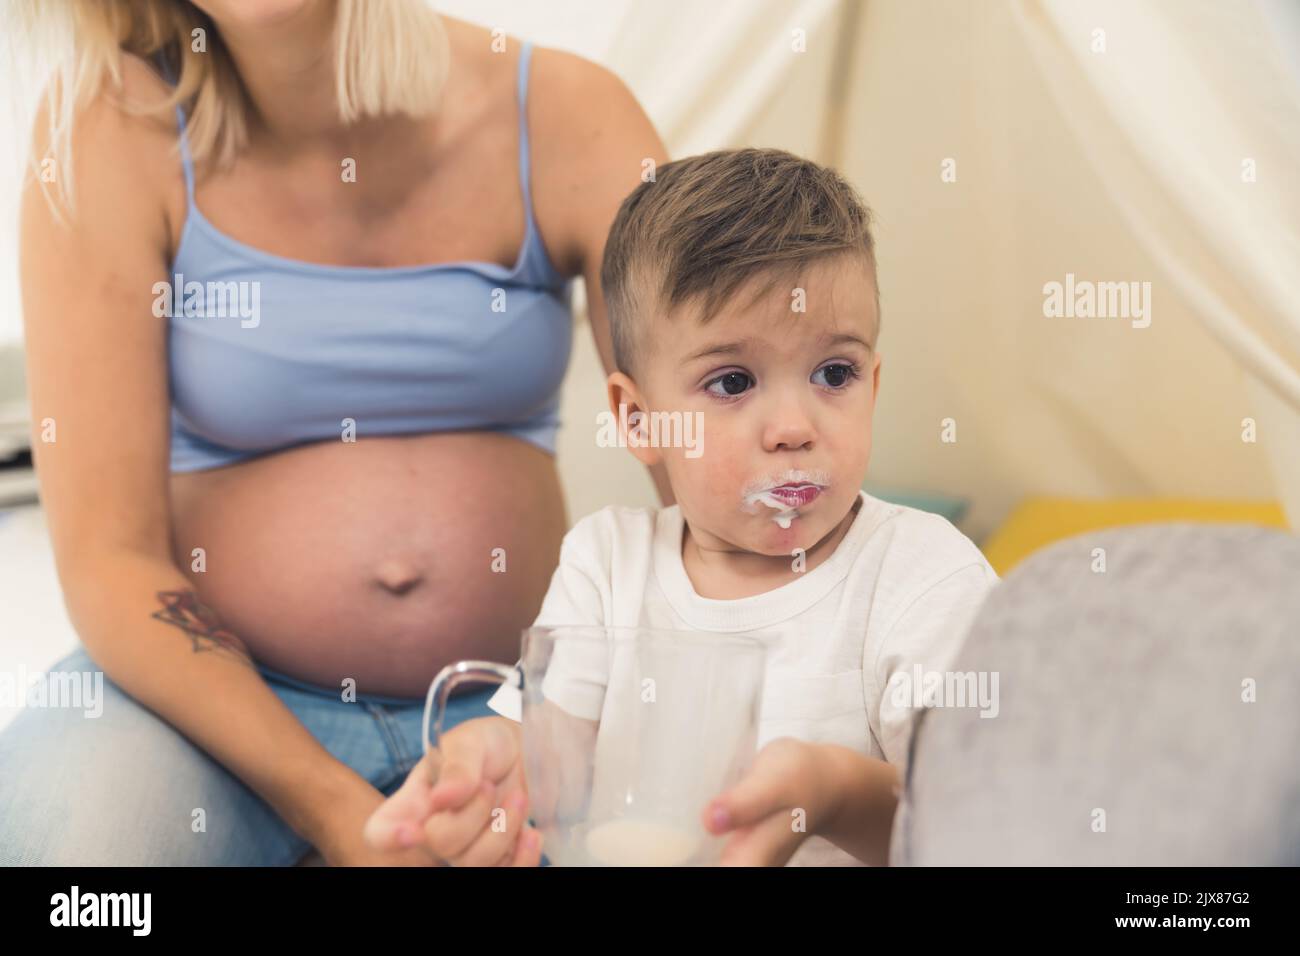 Funny guilty little caucasian baby preschooler boy drinking all of the milk from a cup. Milk marks around the lips. Pregnant mother with visible belly in the background. High quality photo Stock Photo